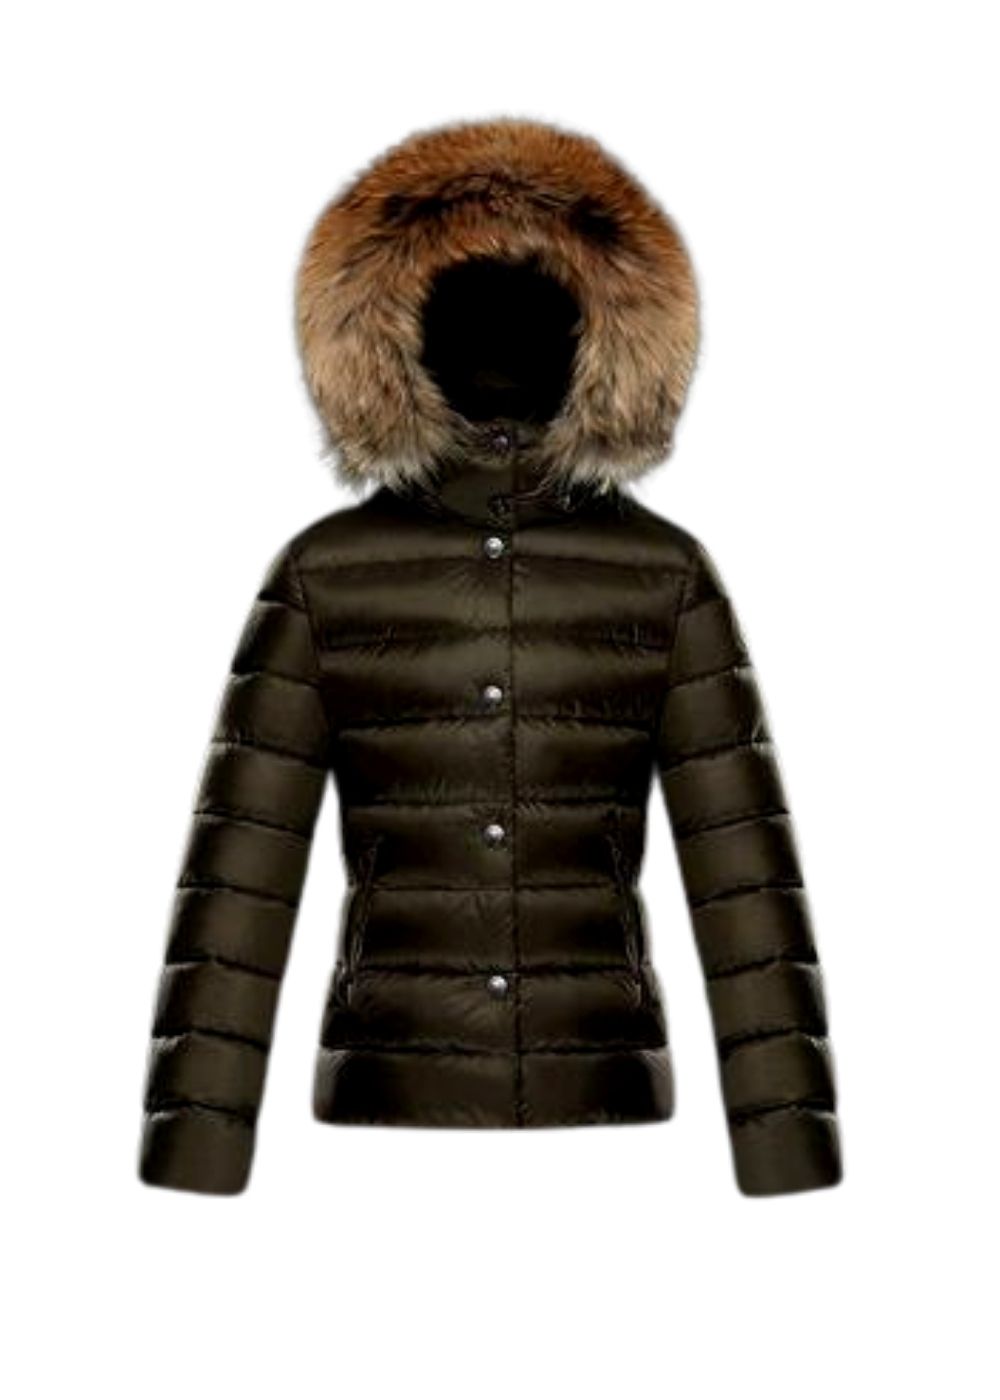 Featured image for “MONCLER PIUMINO ALICE”